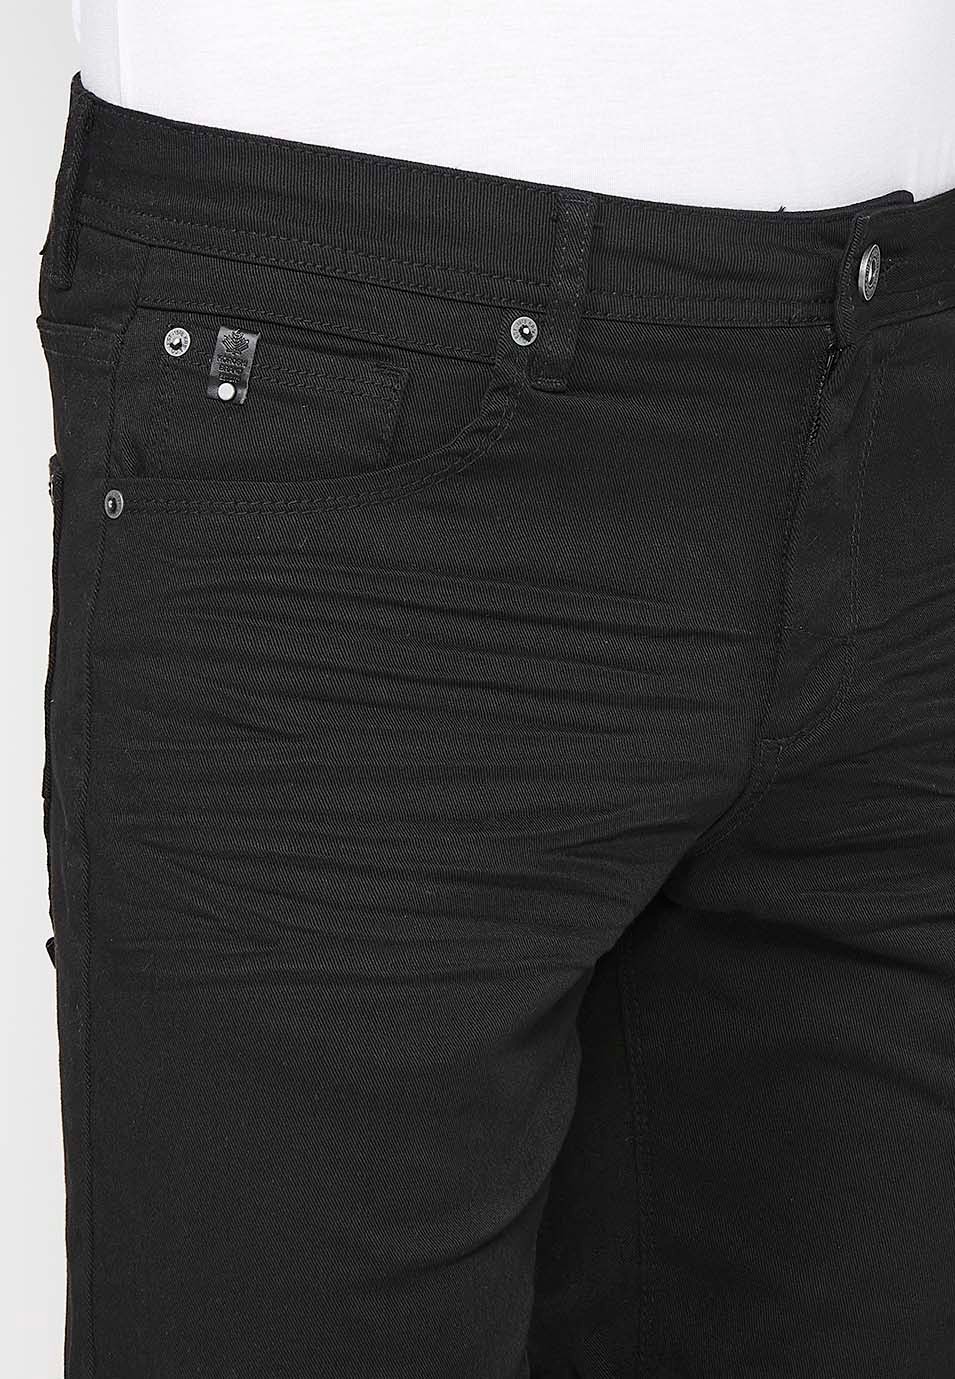 Denim Bermuda shorts with cuffed finish and front zipper and button closure. Five pockets, one black color pocket for men 1